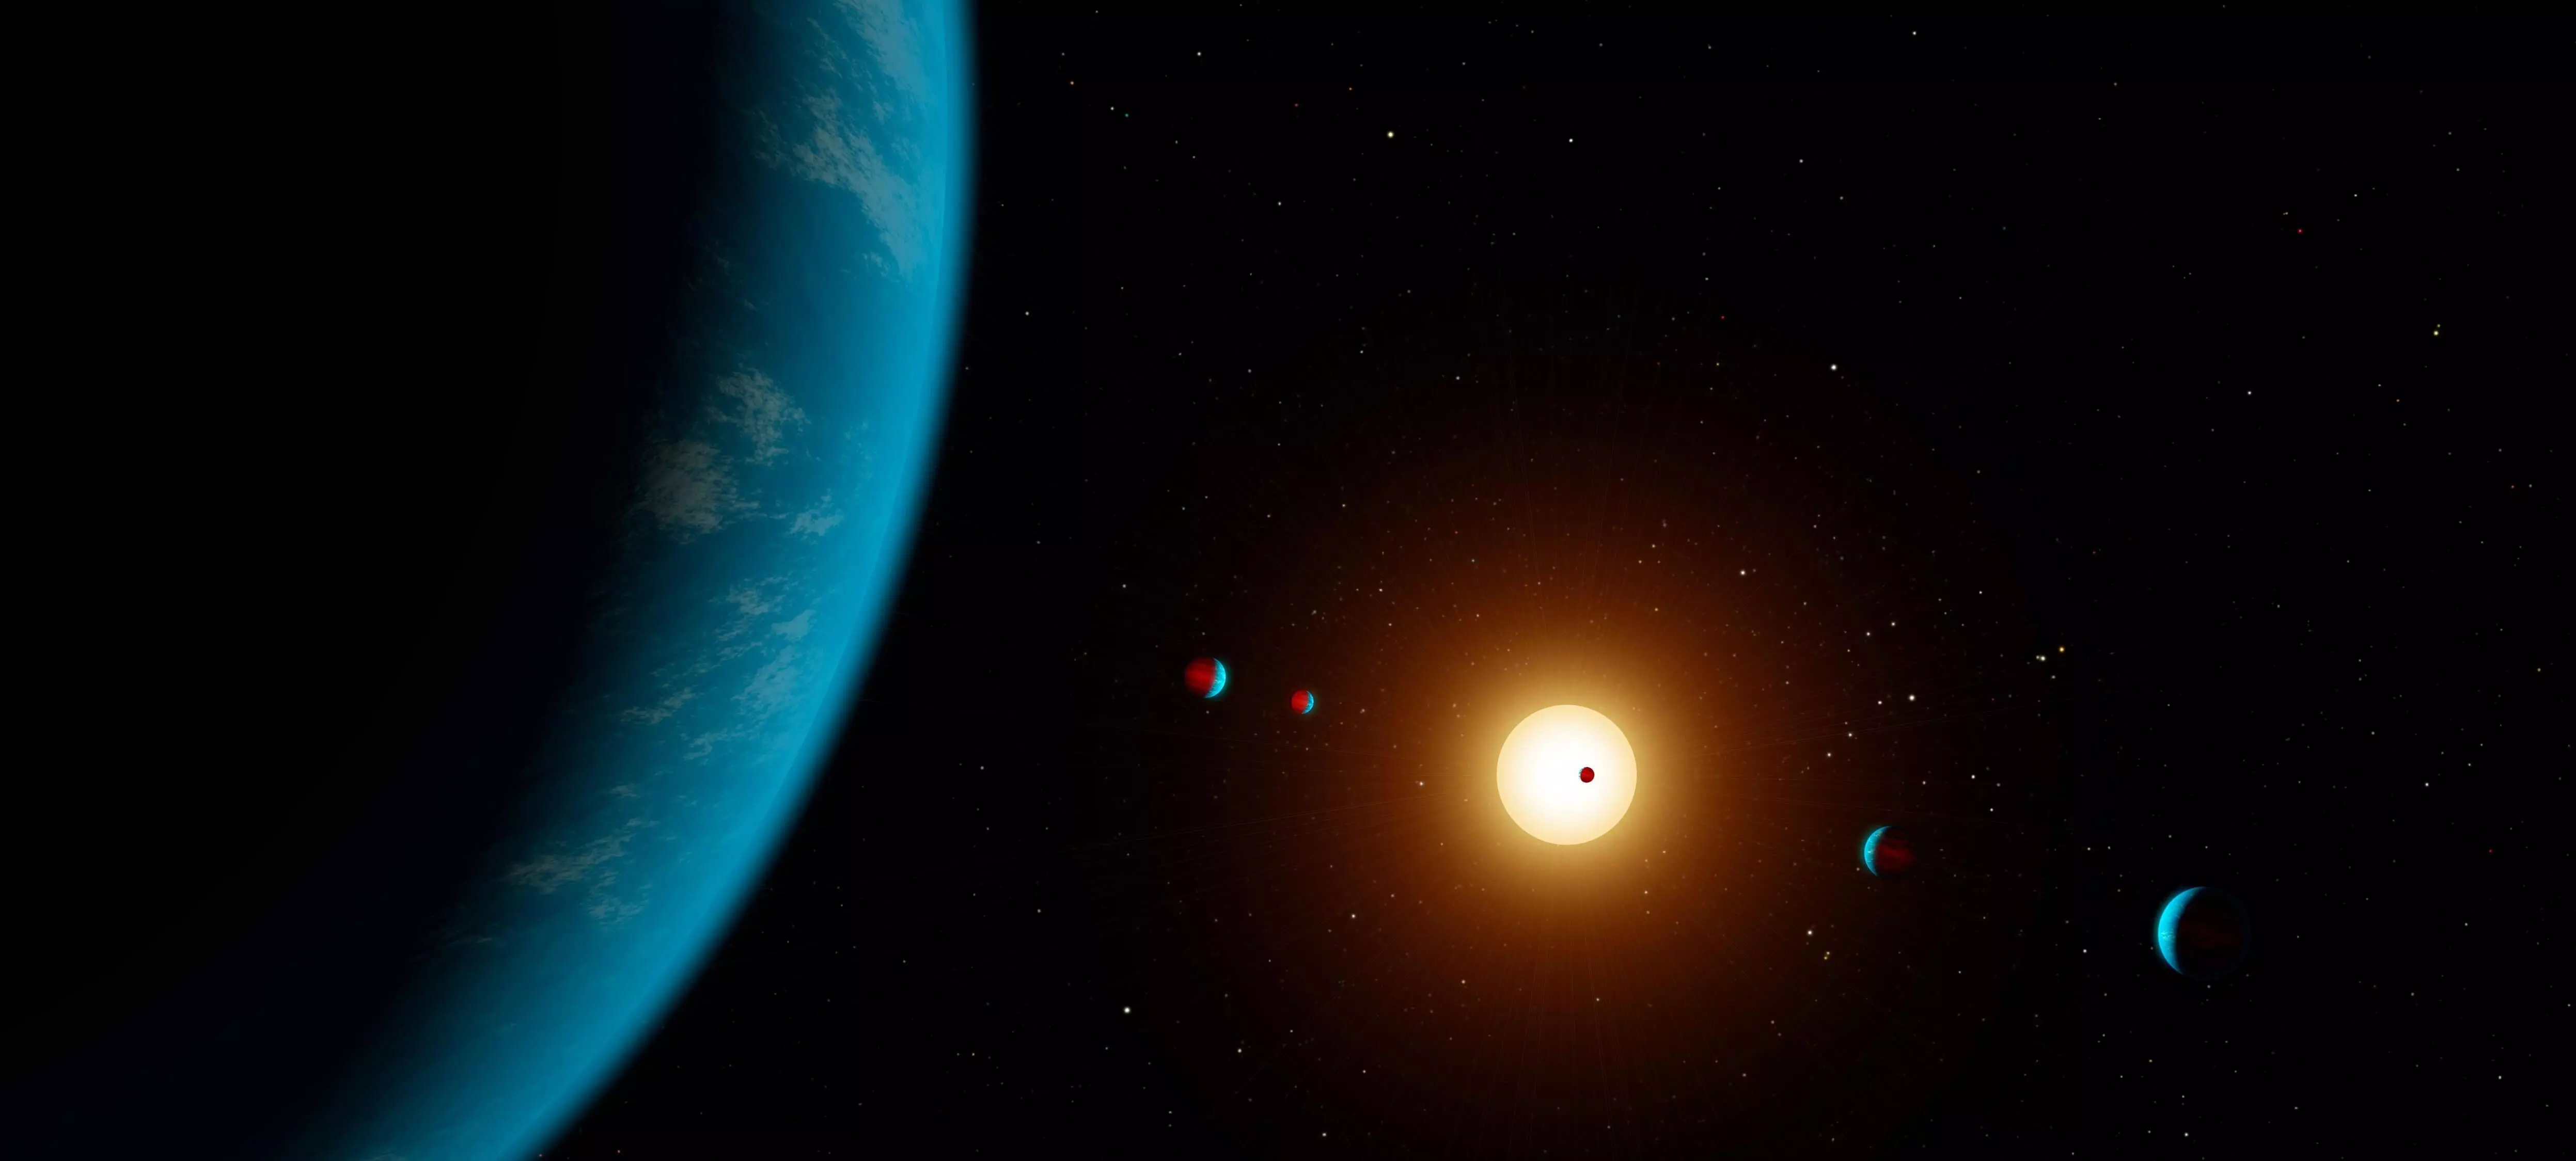 Astronomers discover over 300 unknown exoplanets in Kepler telescope data